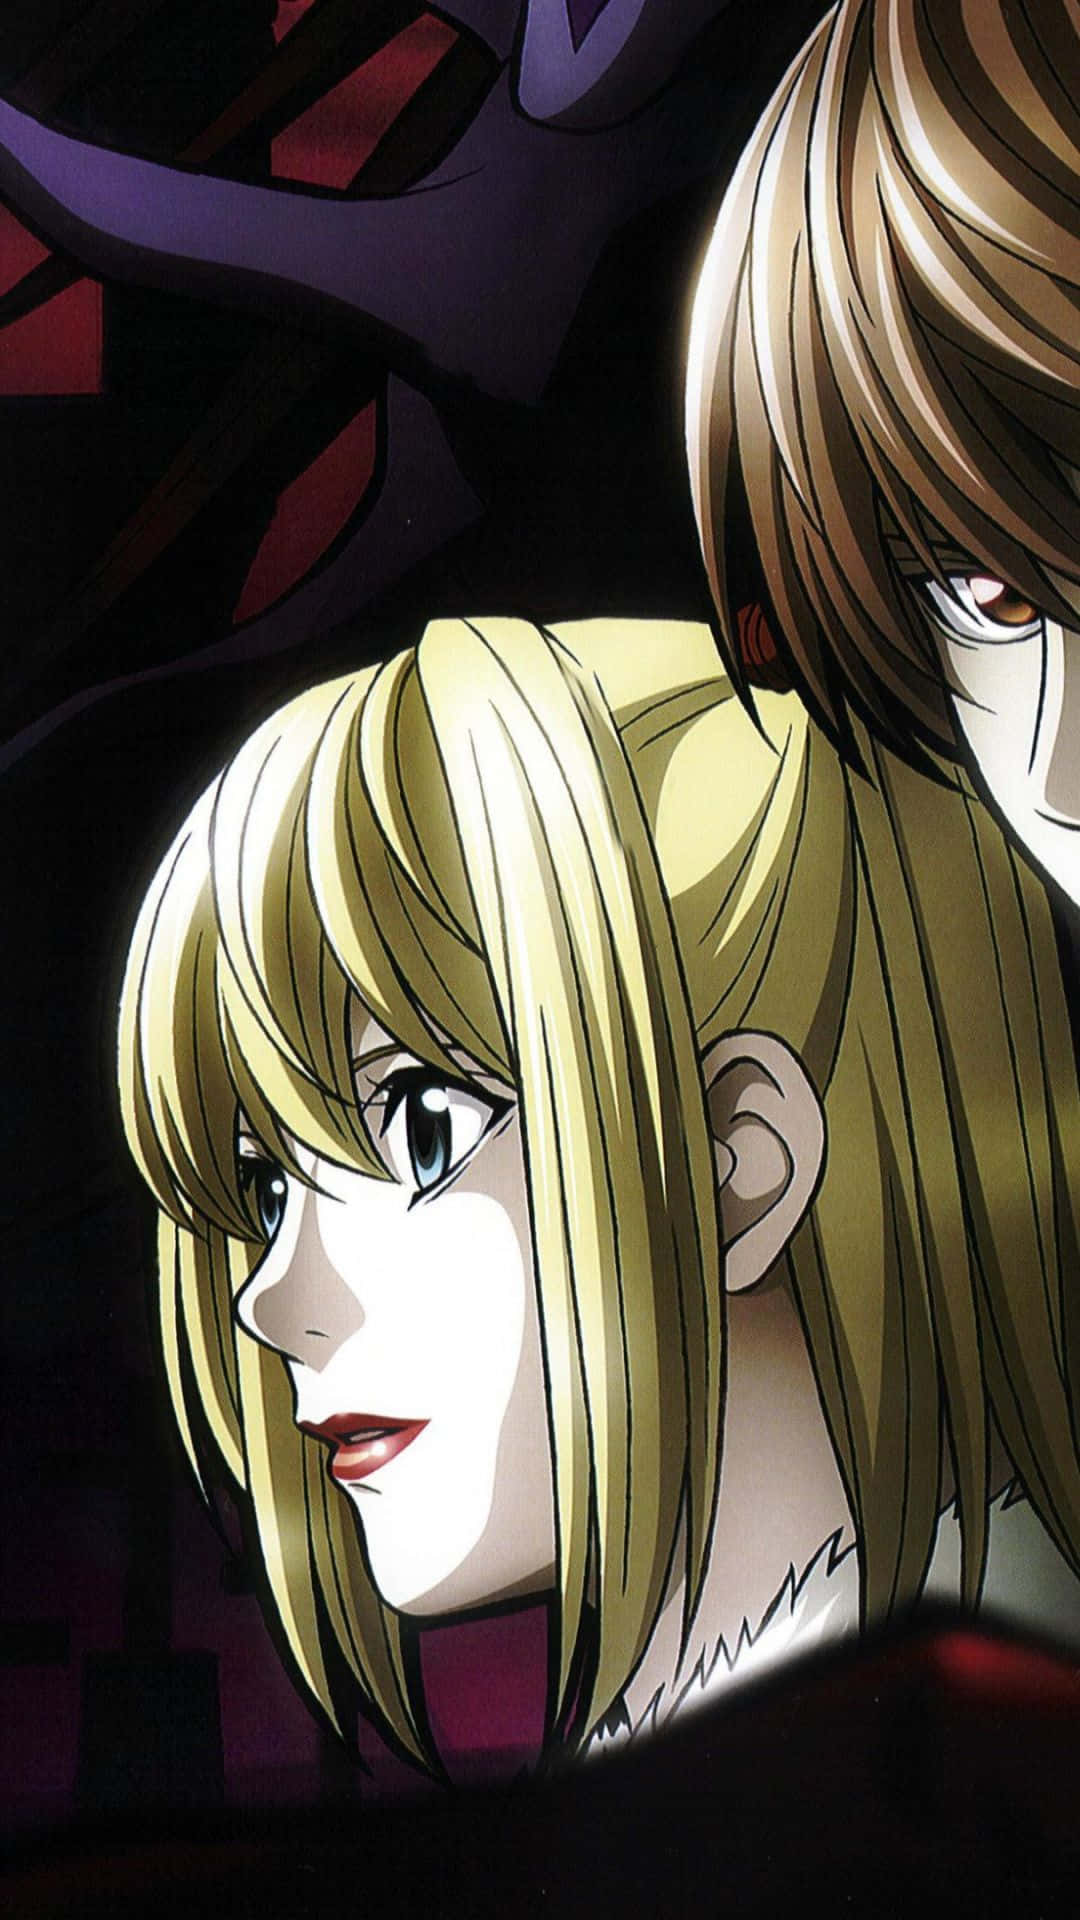 Mello from Death Note with chocolate in hand Wallpaper